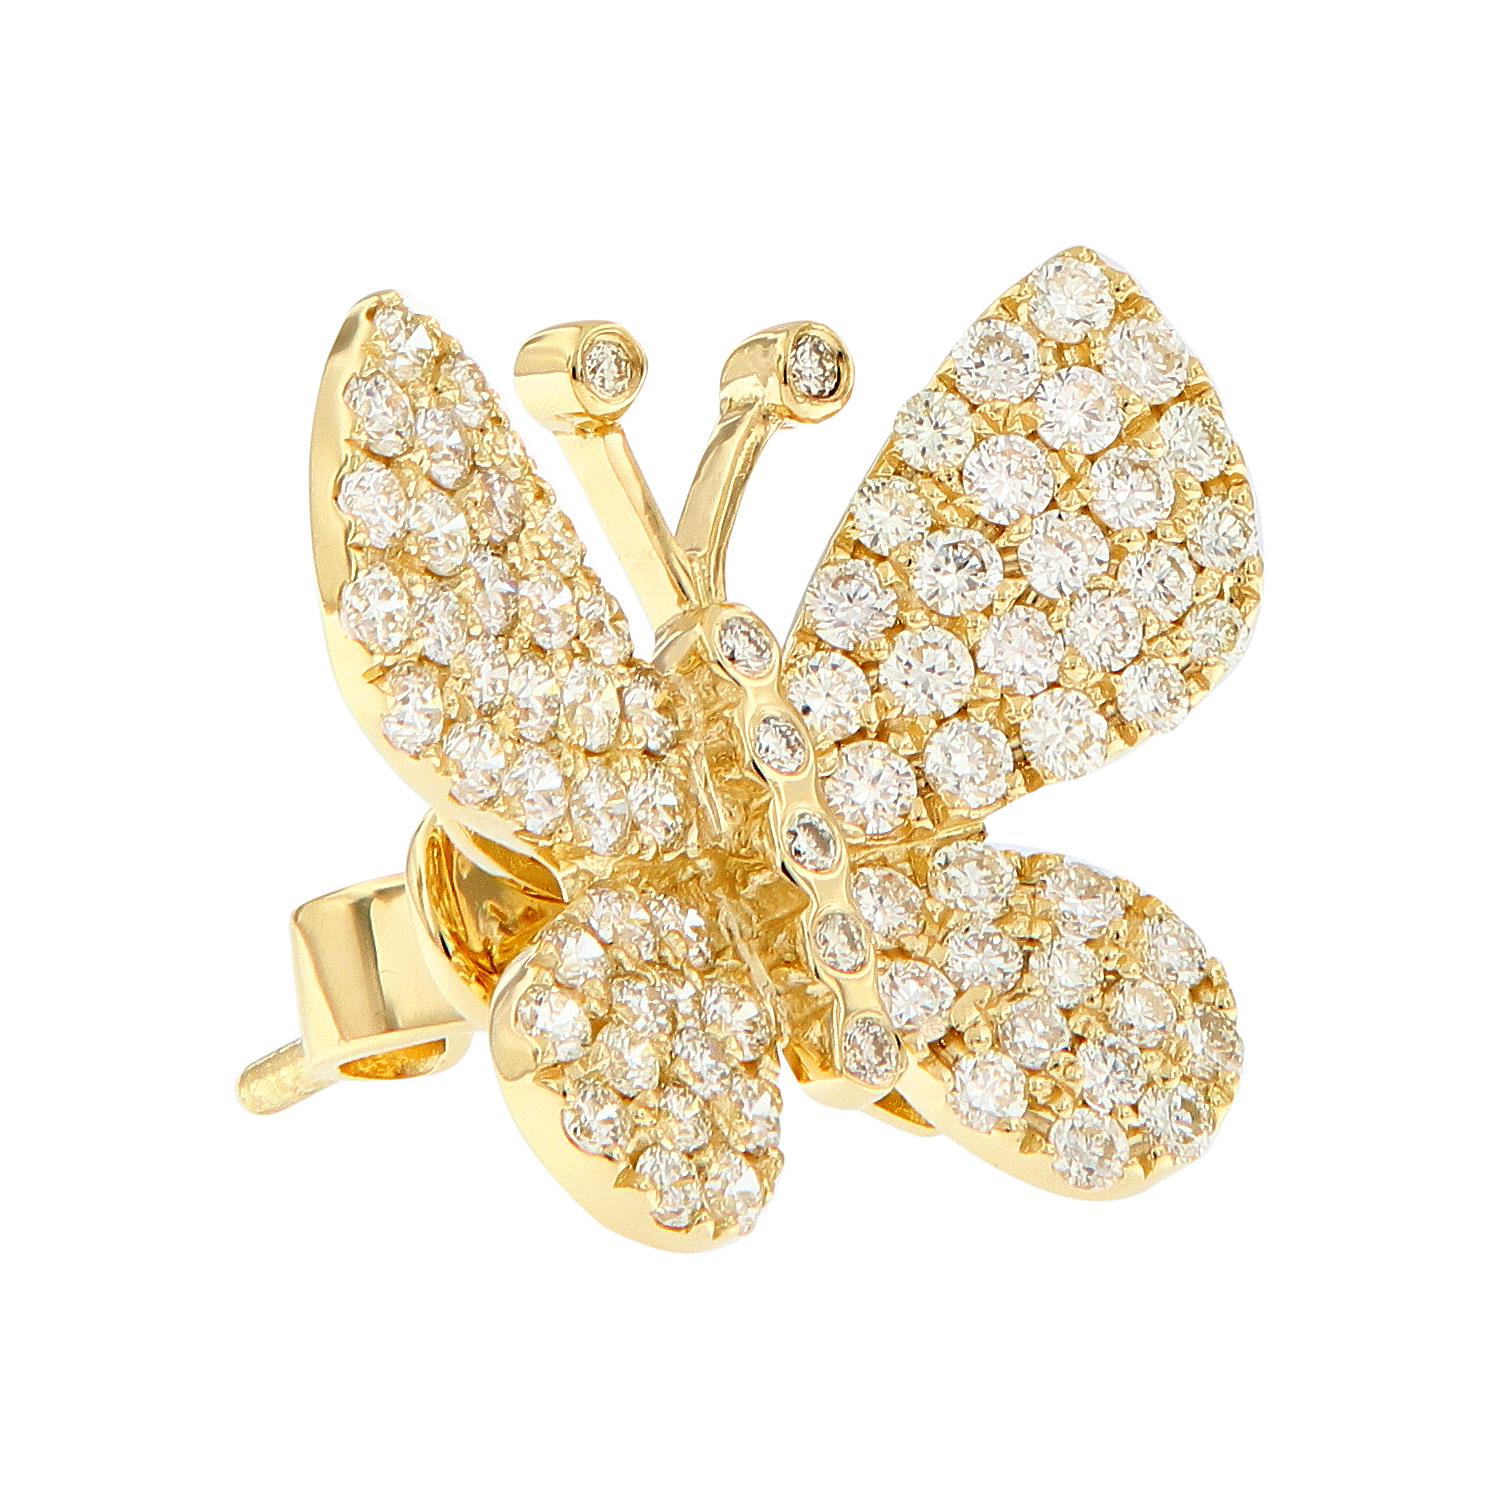 Always have a reminder of summer with these contemporary 18k gold butterfly earrings covered with pave and bezel set diamonds. Weigh 6.1 grams.

Diamonds 1.49 cttw